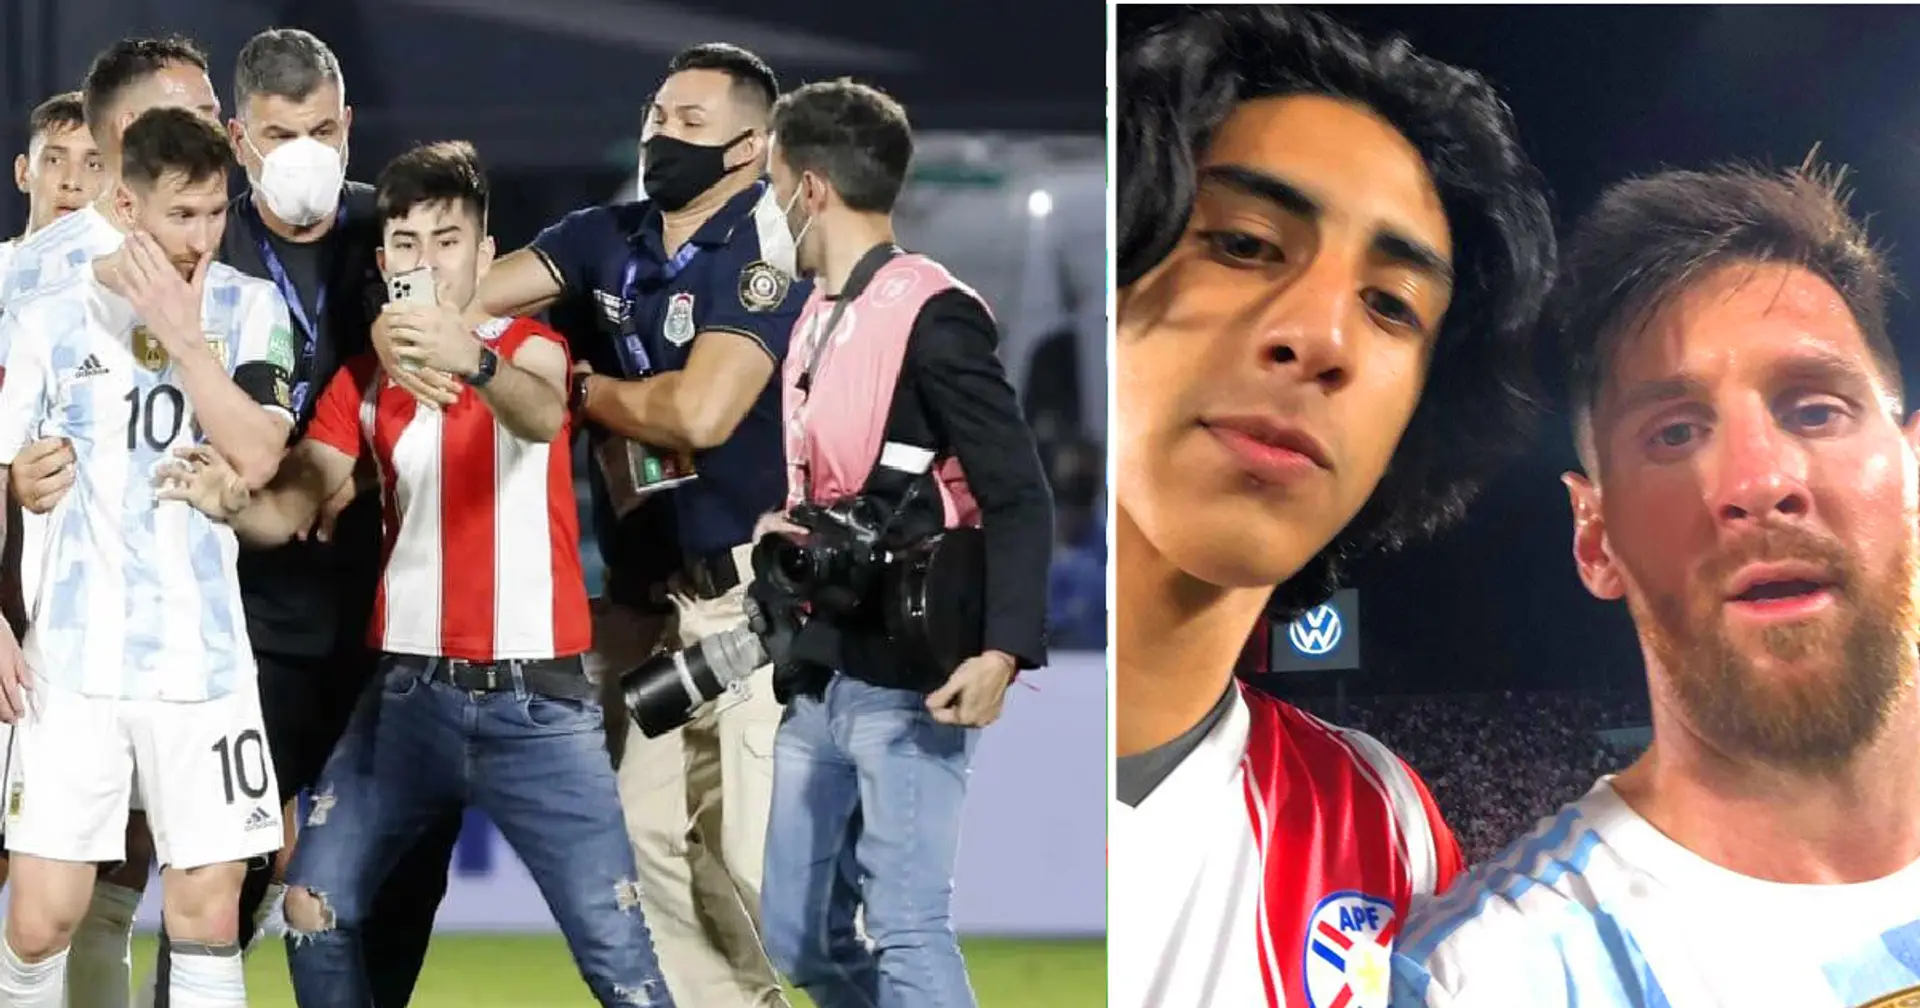 Lionel Messi takes selfie with fans of opposing team fans after Argentina game